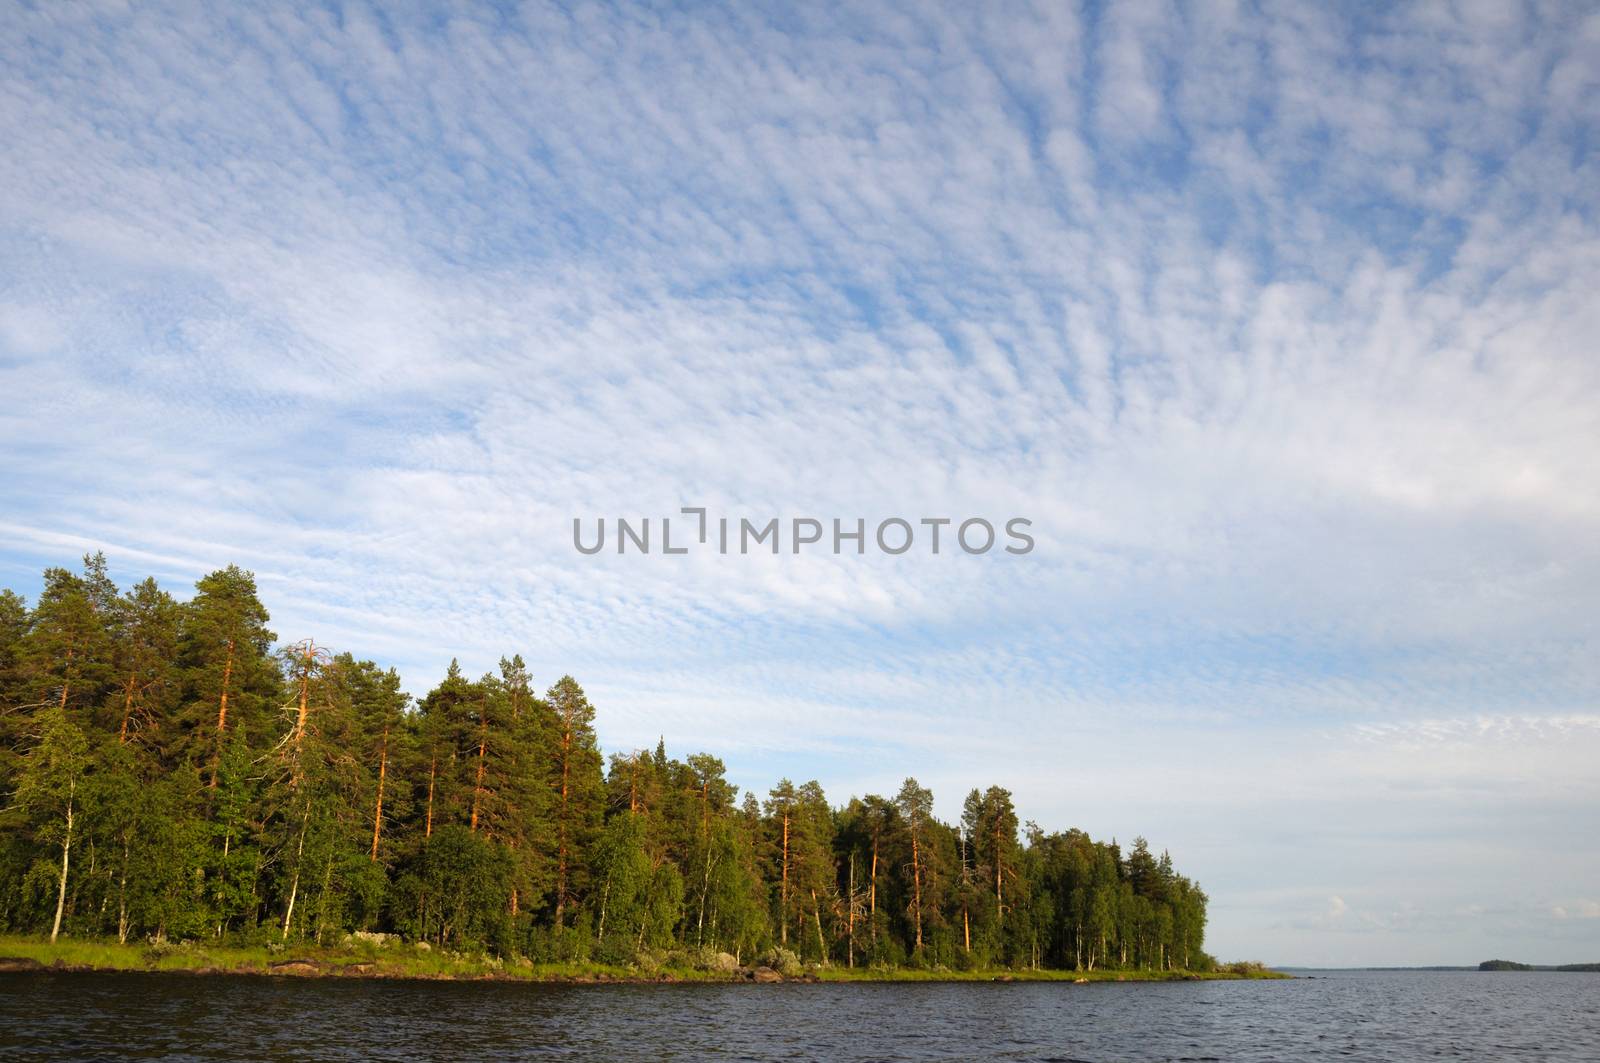 The beautiful picture of Karelian forest at the edge of a lake